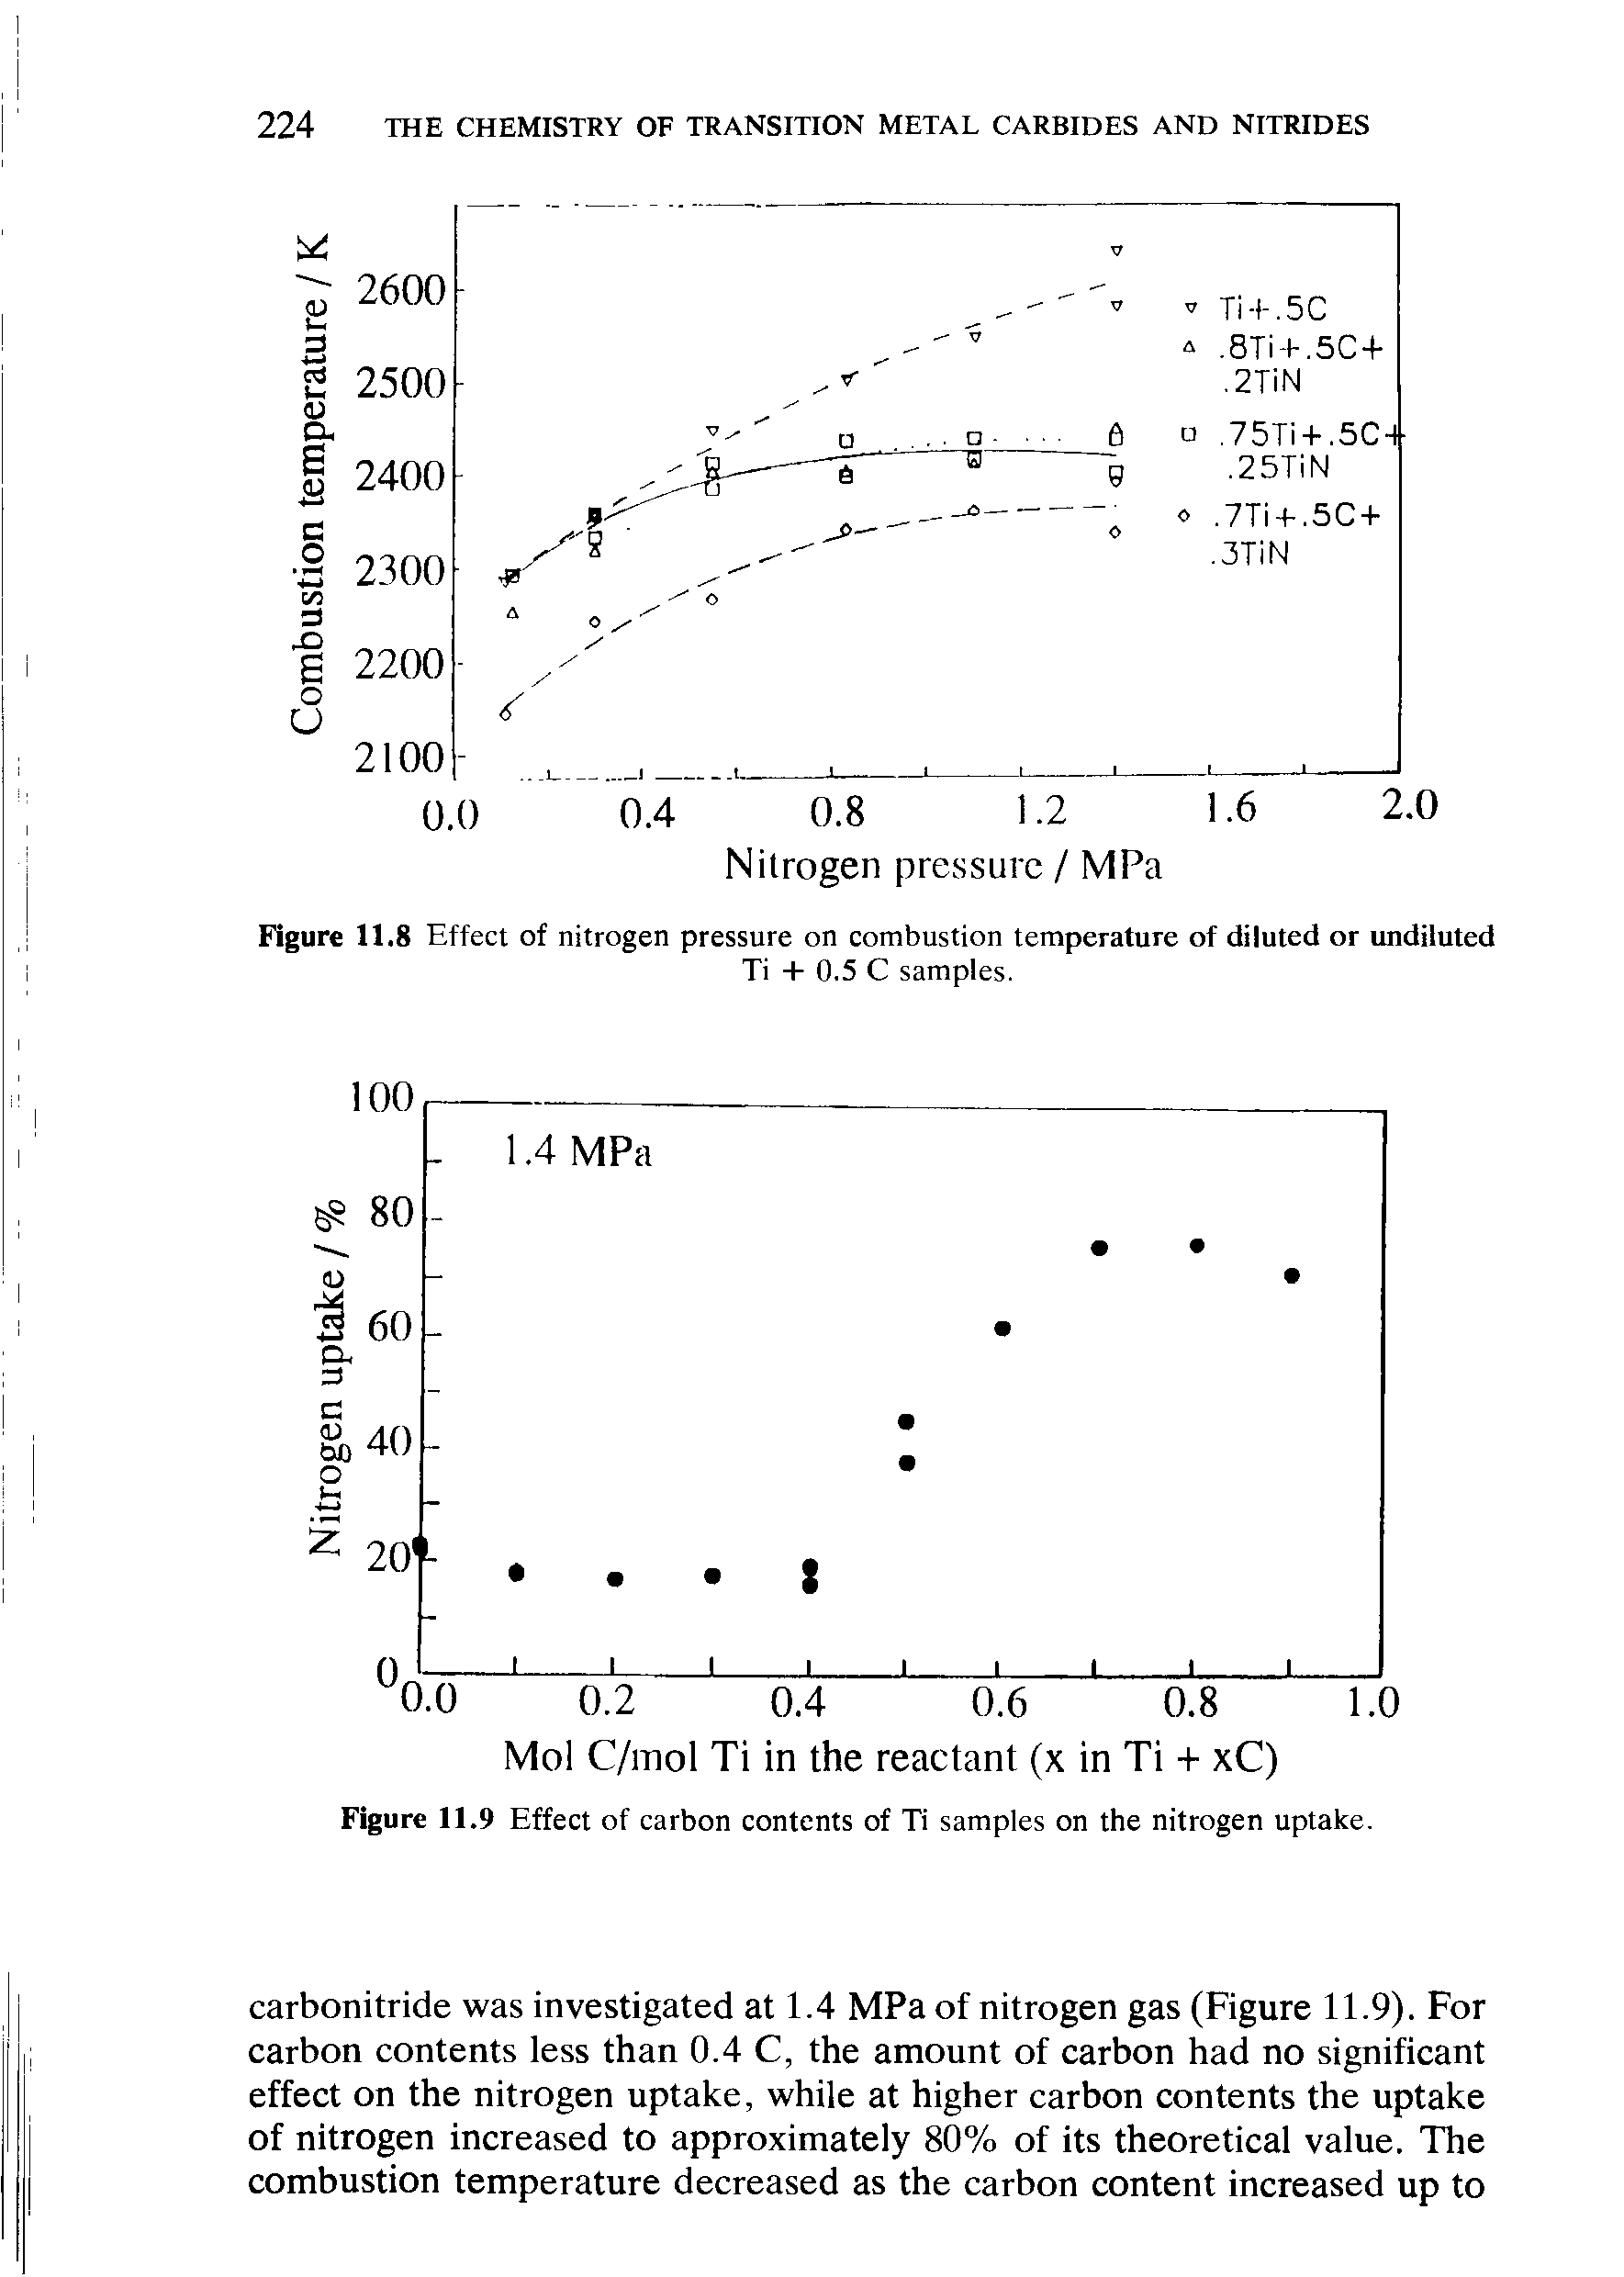 Figure 11.9 Effect of carbon contents of Ti samples on the nitrogen uptake.